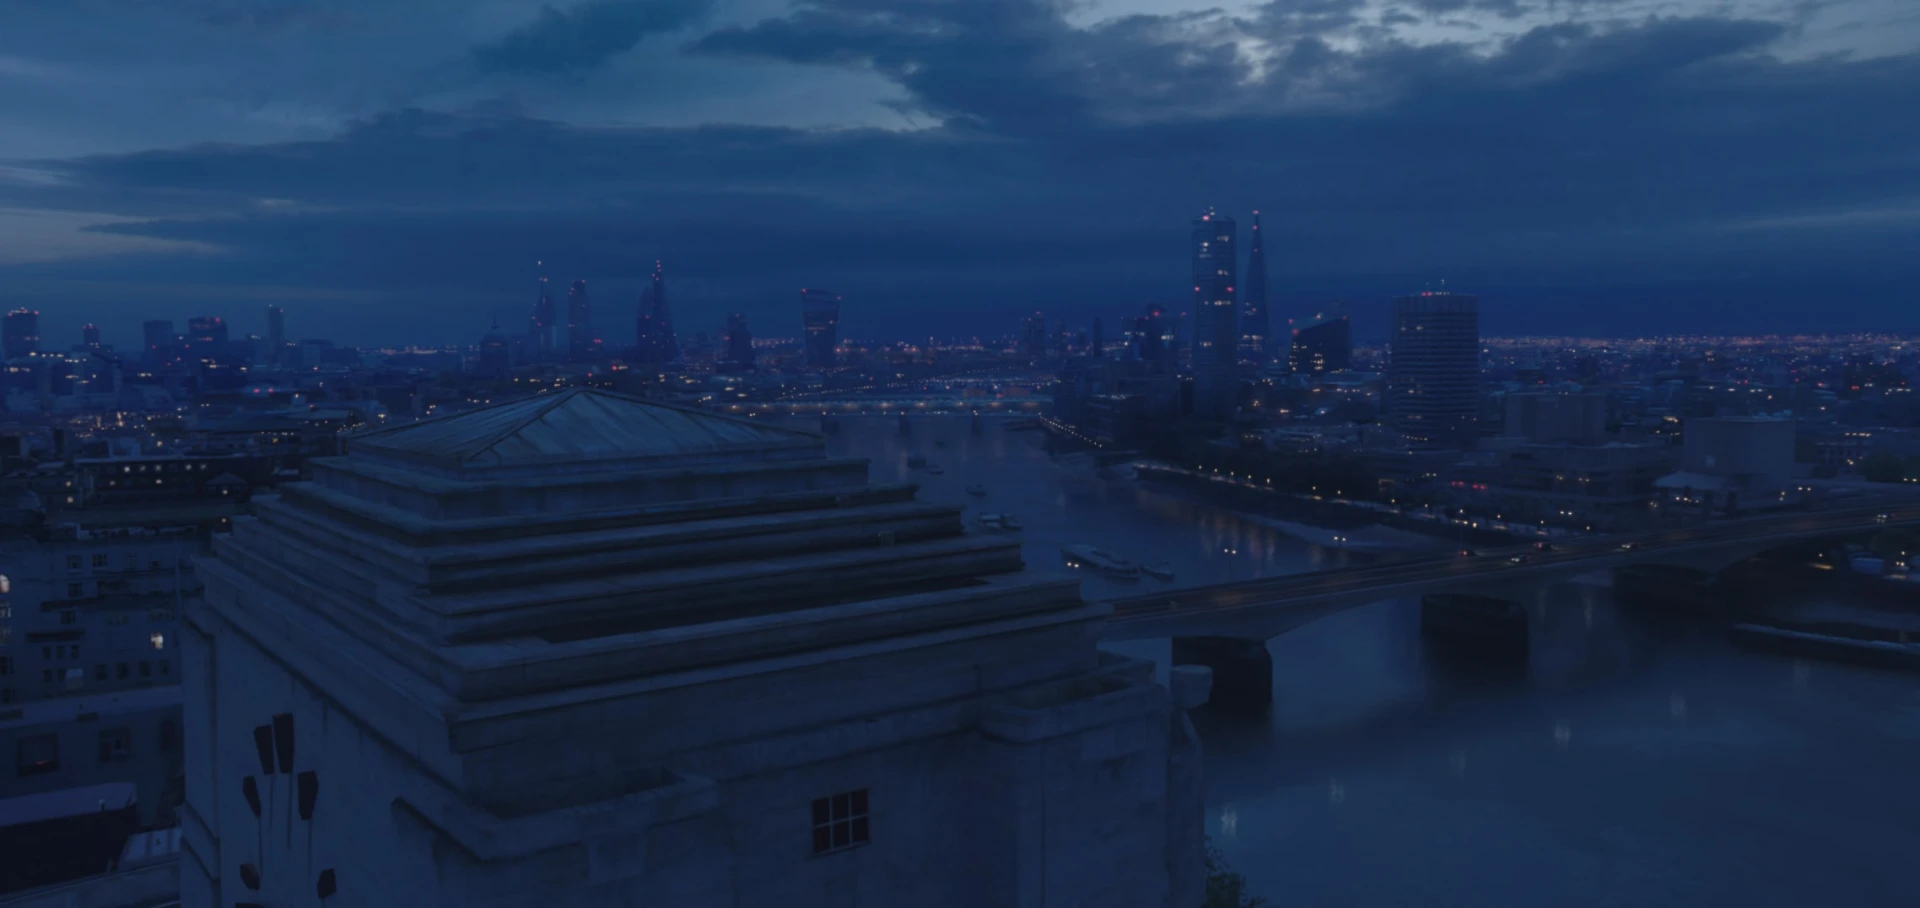 Assassin's Creed view after final version Raynault vfx